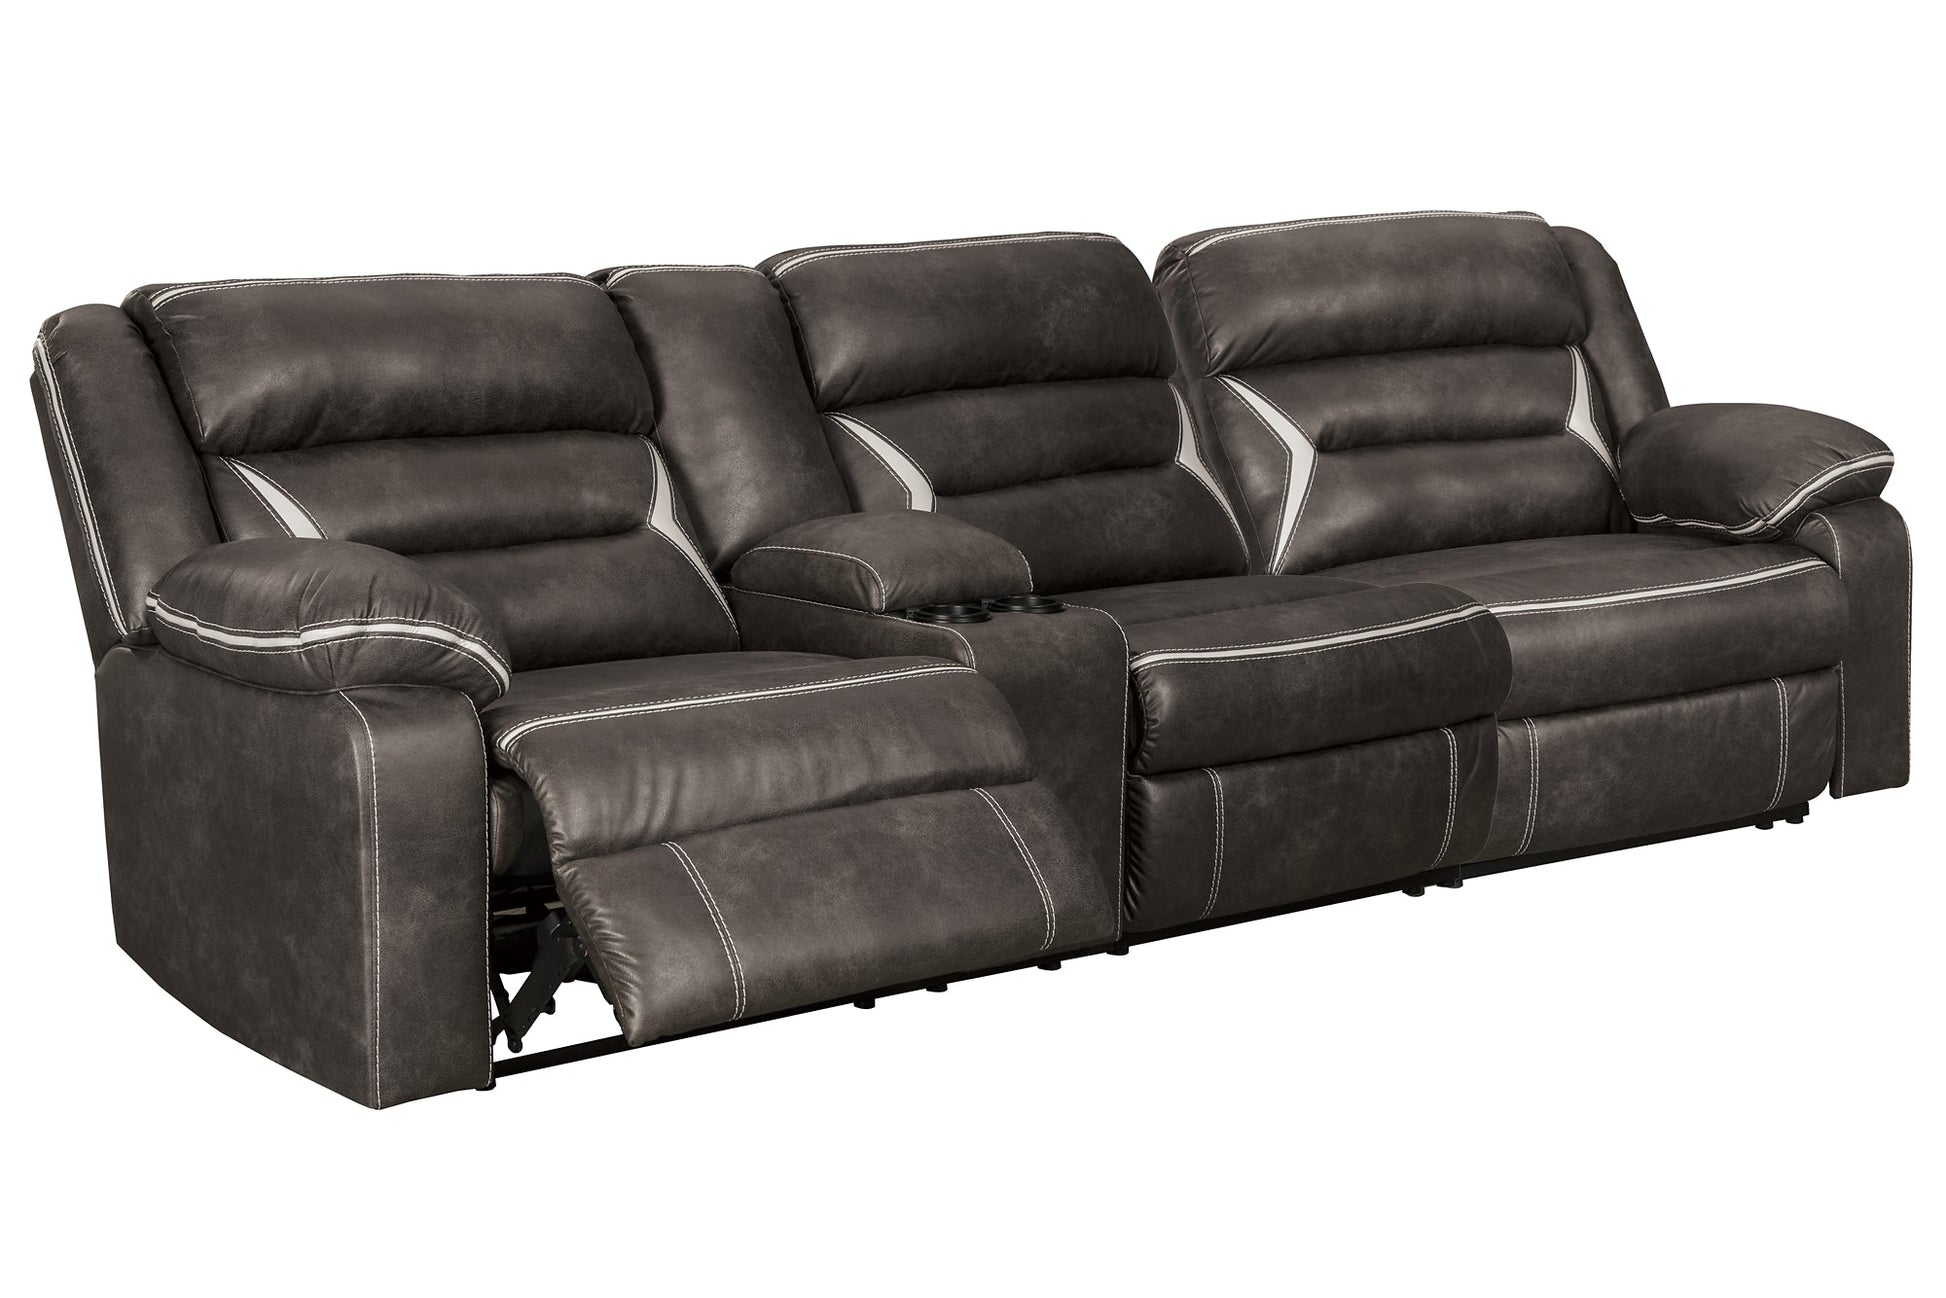 Kincord 2-Piece Sectional with Recliner at Cloud 9 Mattress & Furniture furniture, home furnishing, home decor